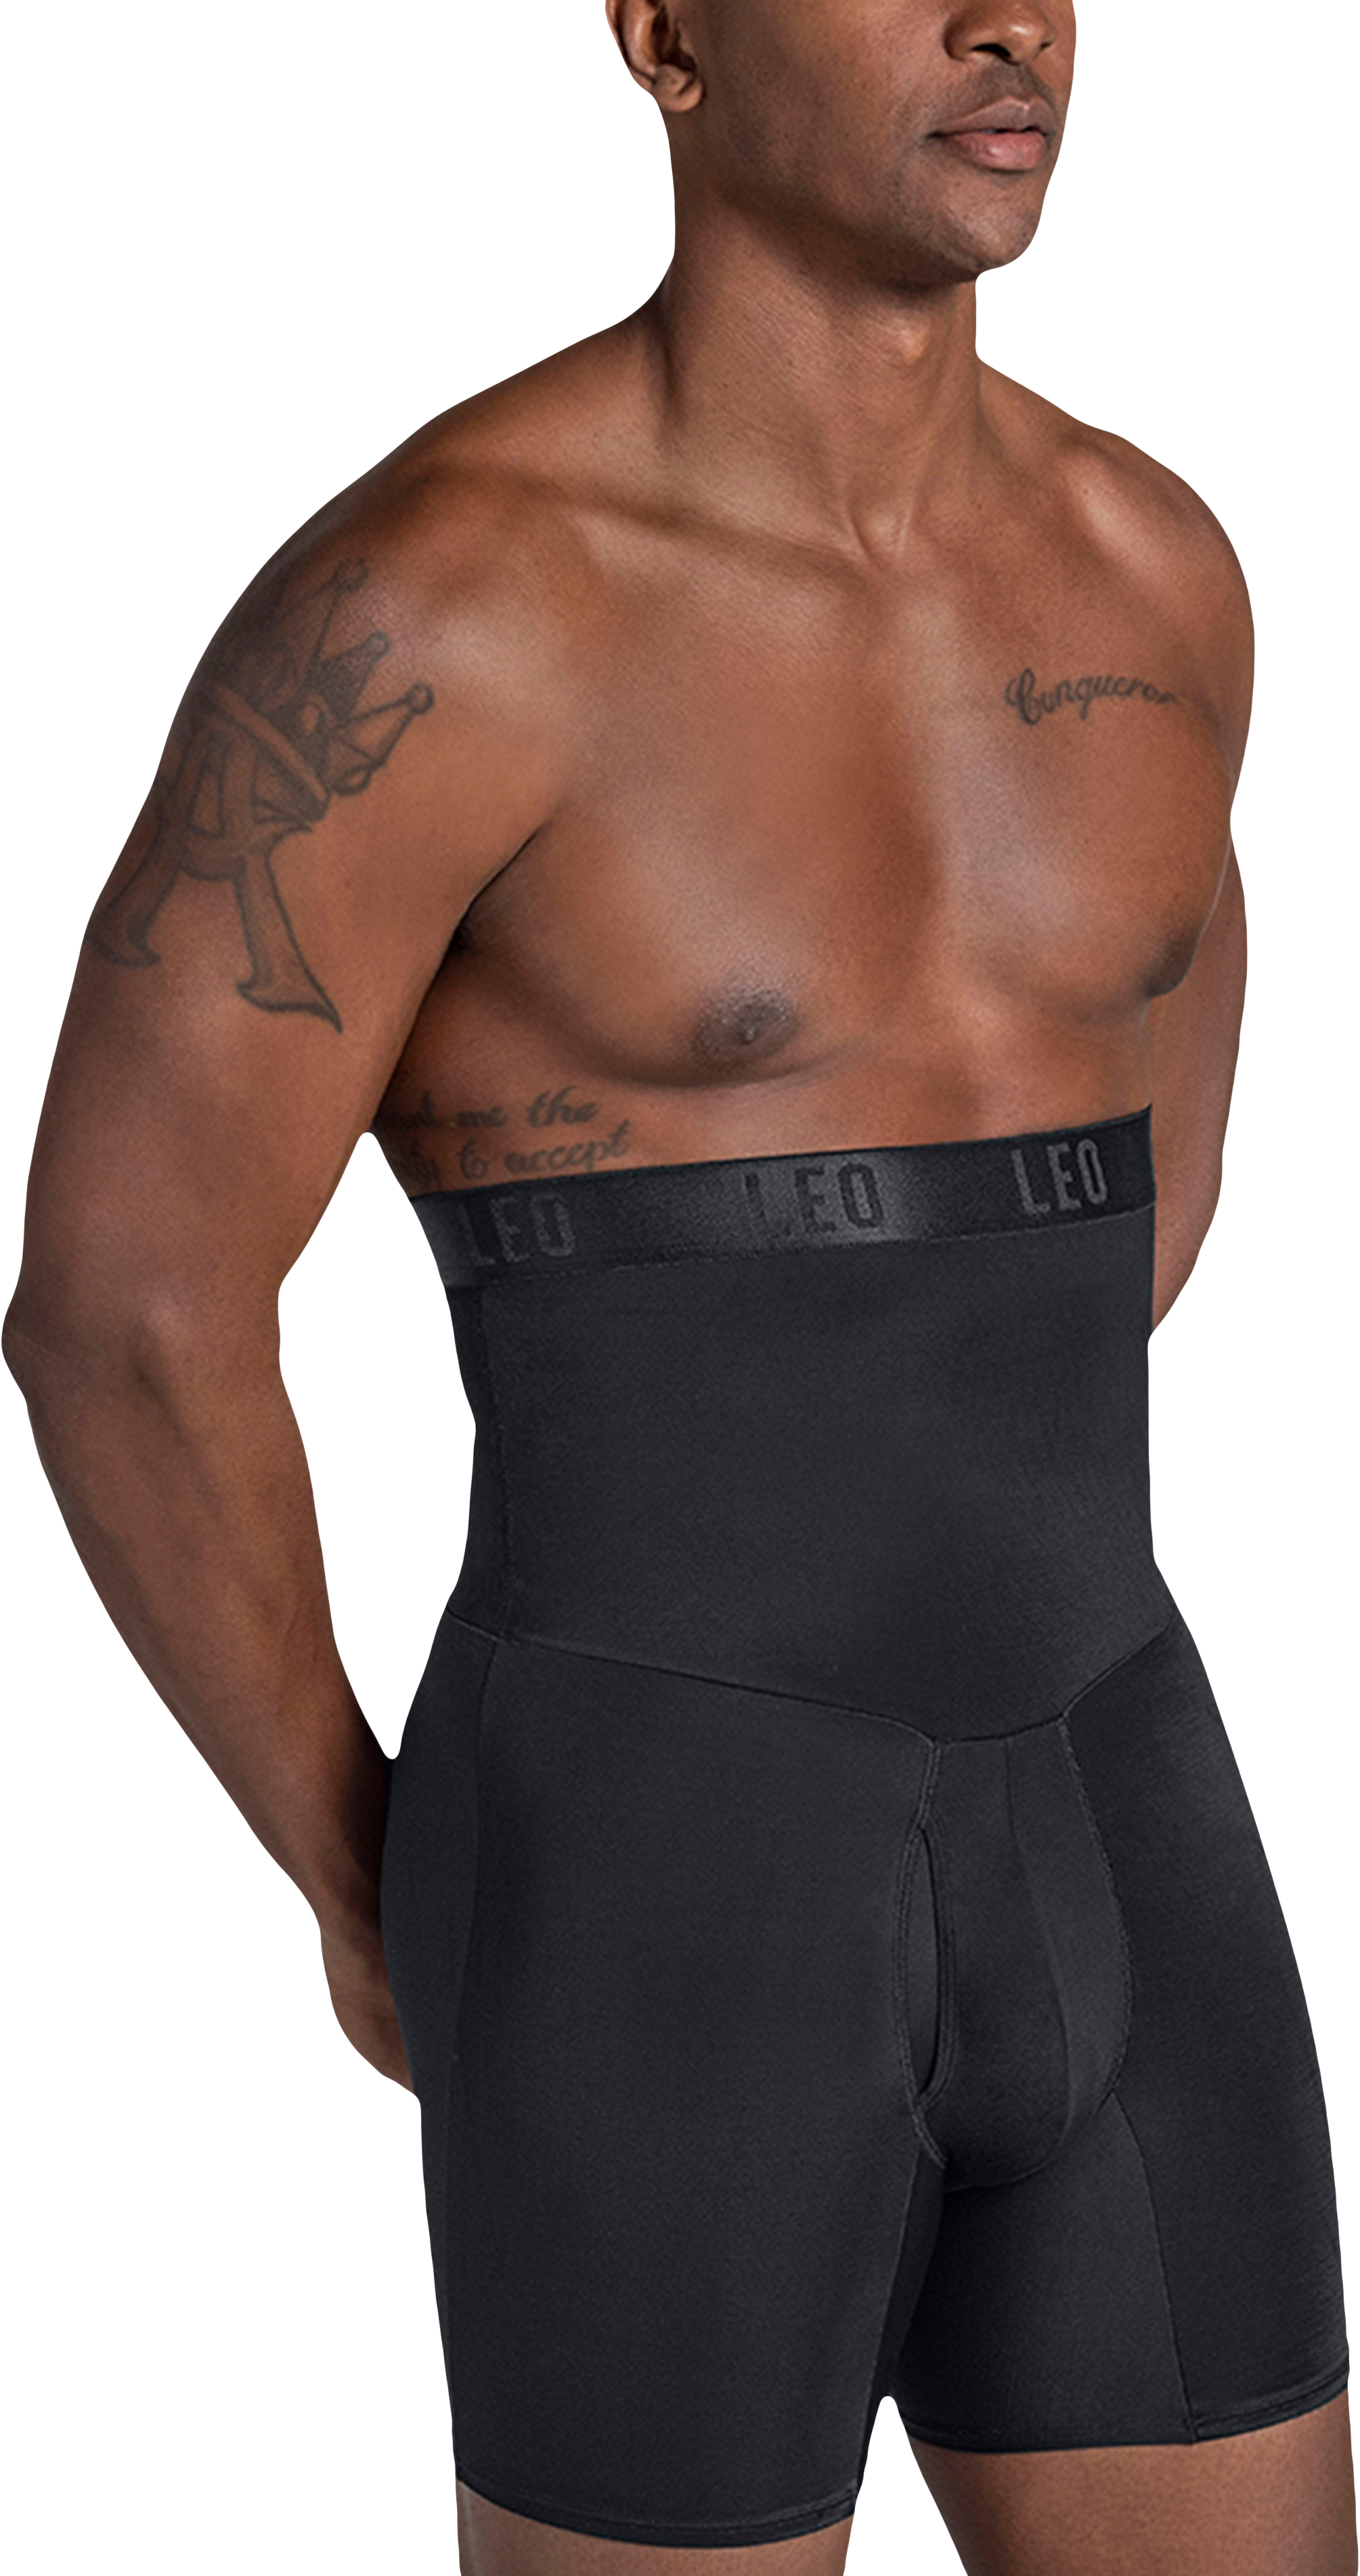 Leonisa Women's Firm Compression BoyShorts Body Shaper with Butt Lifter